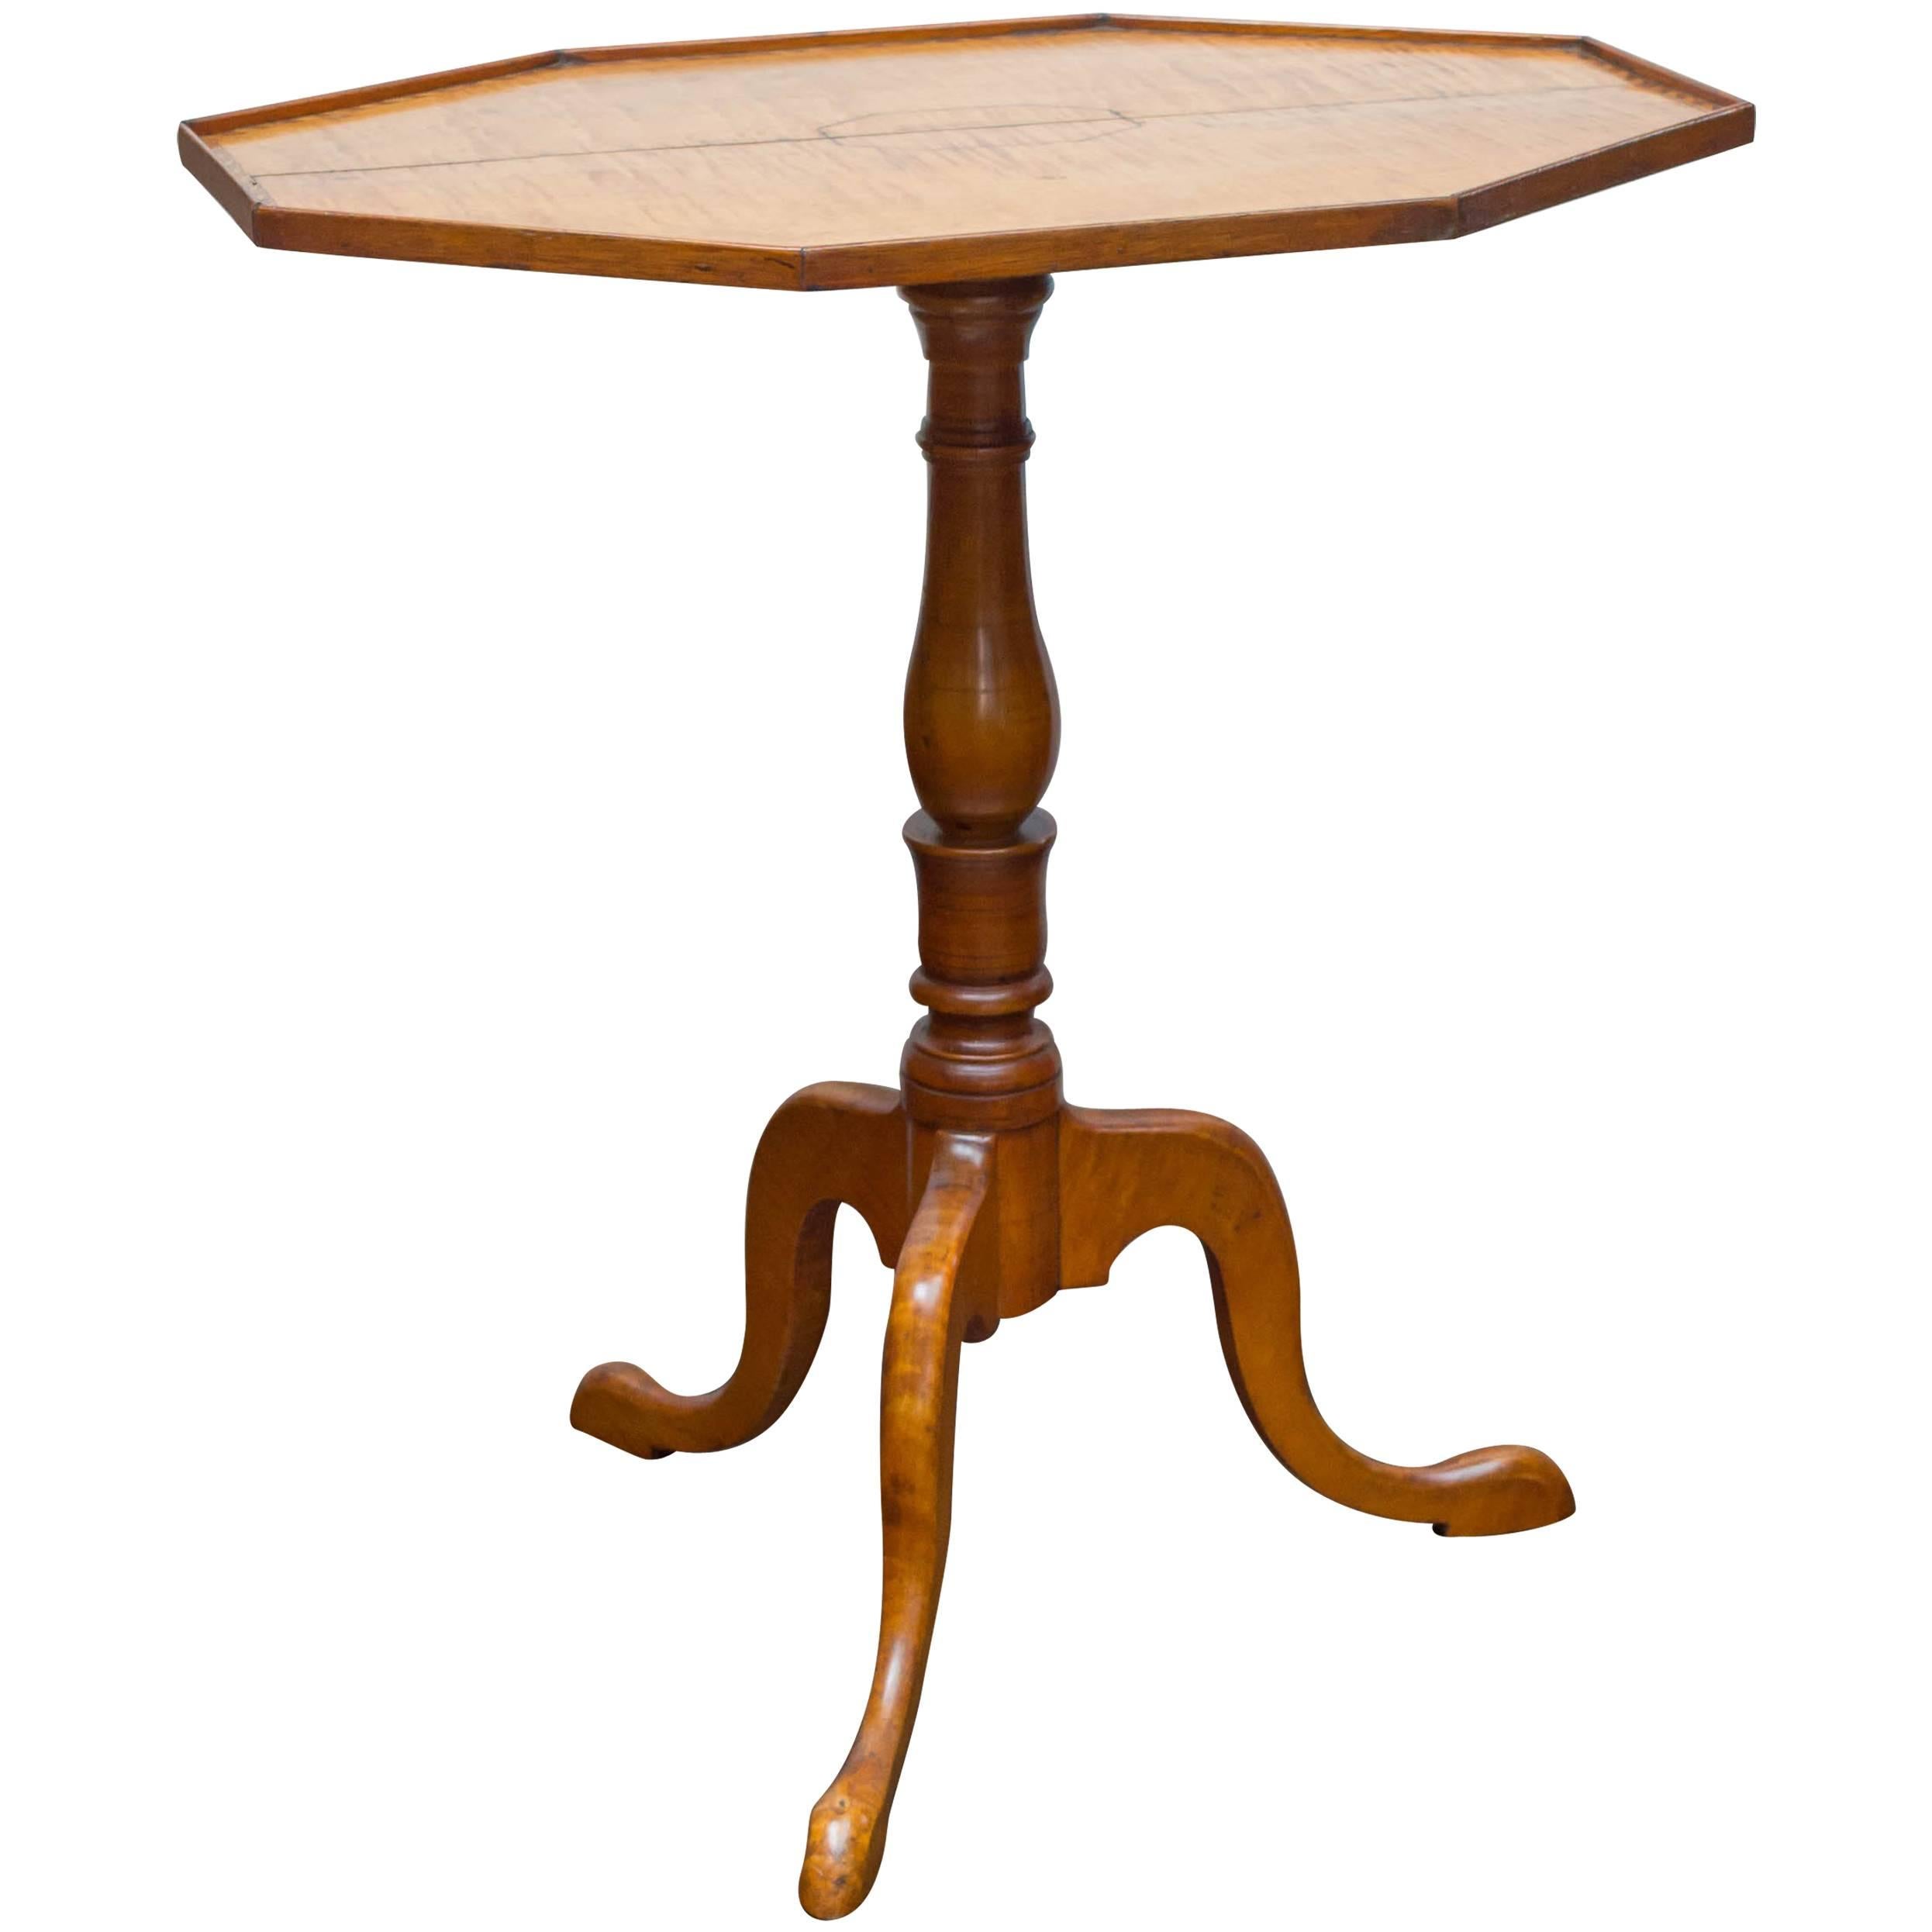 Late 18th Century American Tiger Maple, Tilt Top Candle Stand